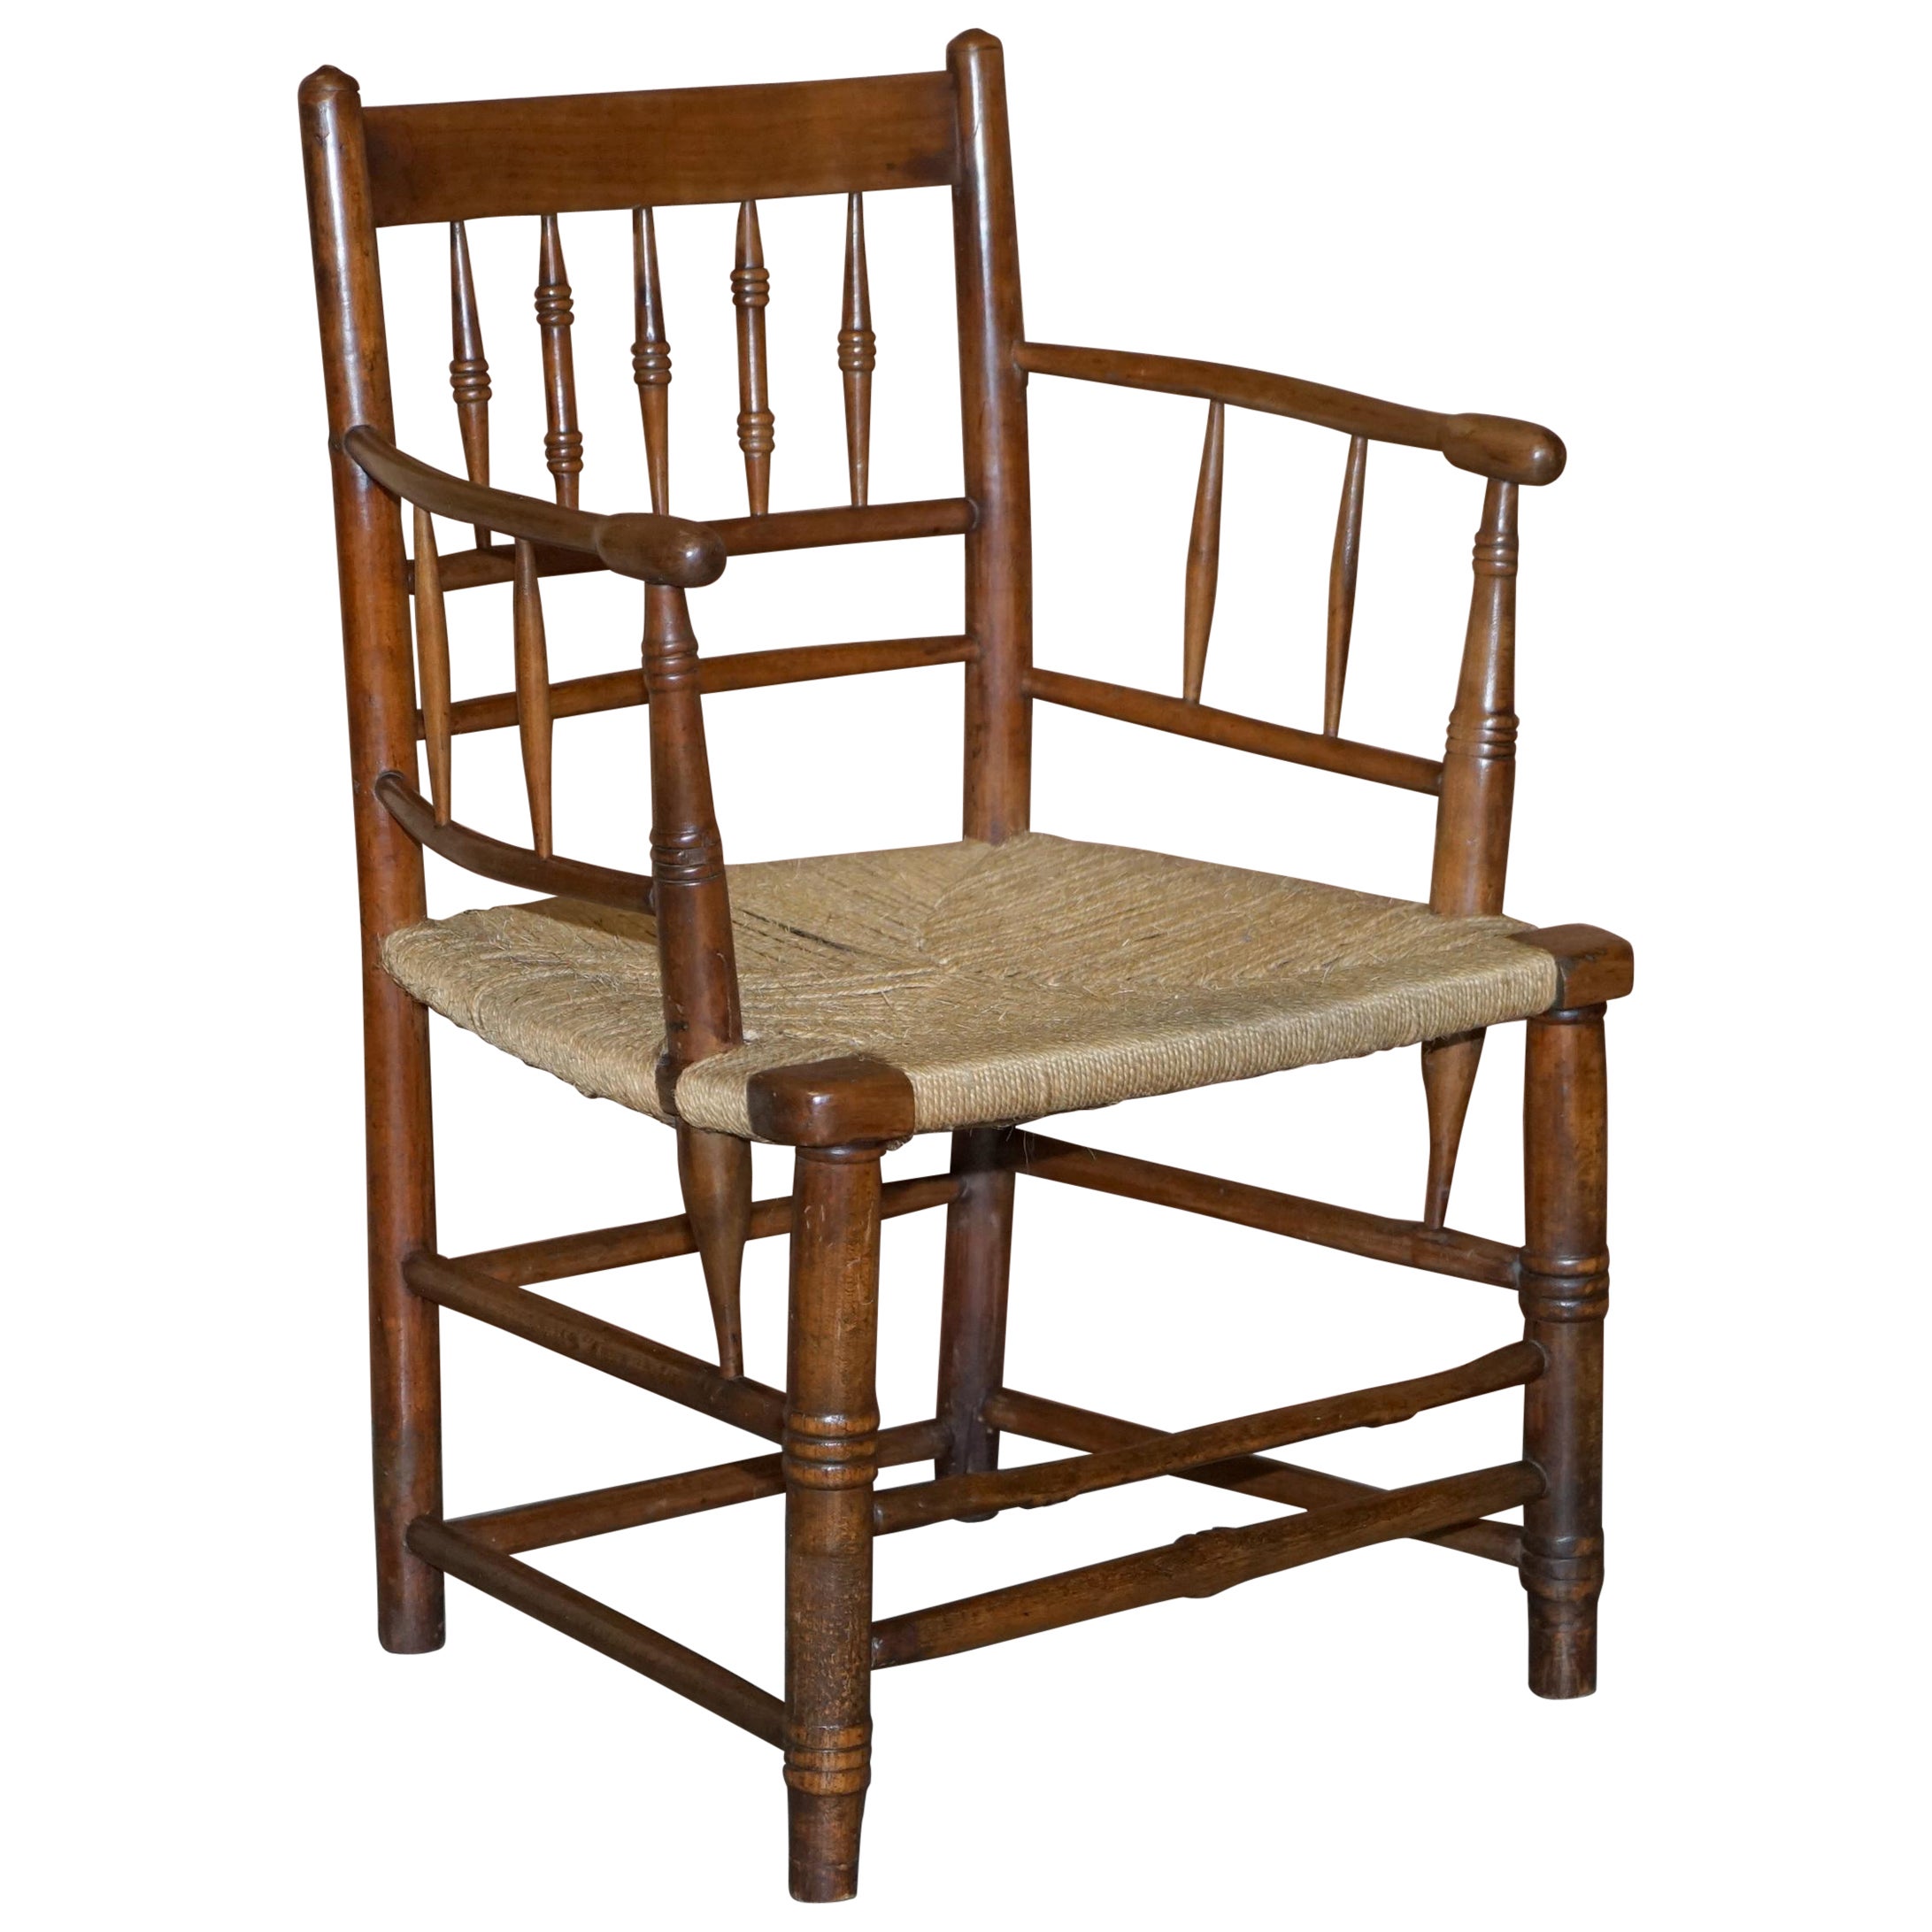 How old is a Morris chair?